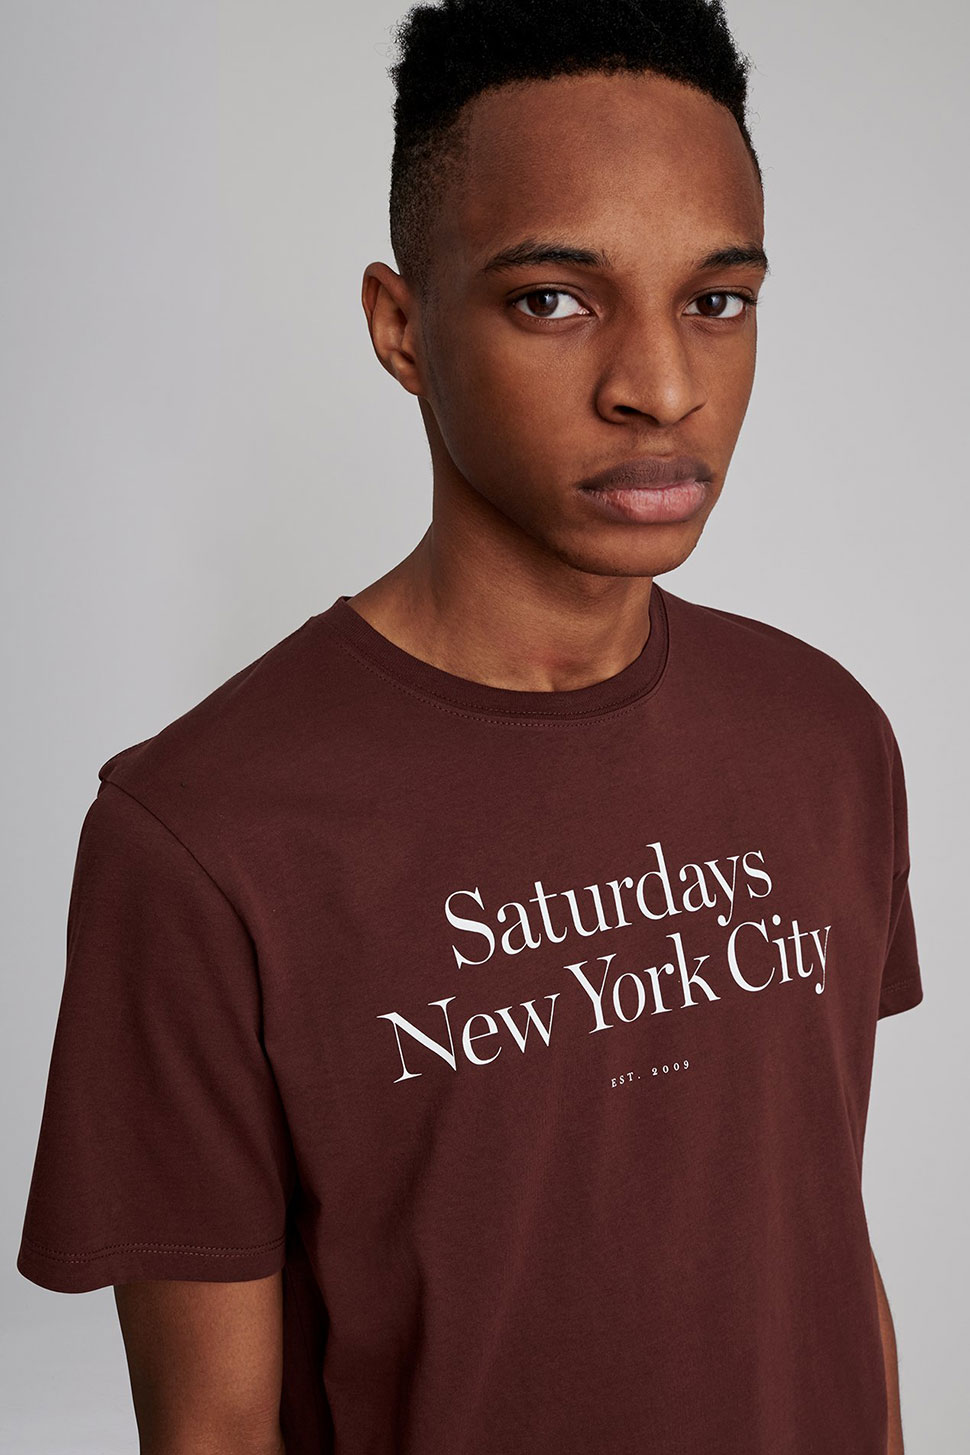 Saturdays NYC Fall 2019 Collection - Shop Saturdays NYC at Commonwealth